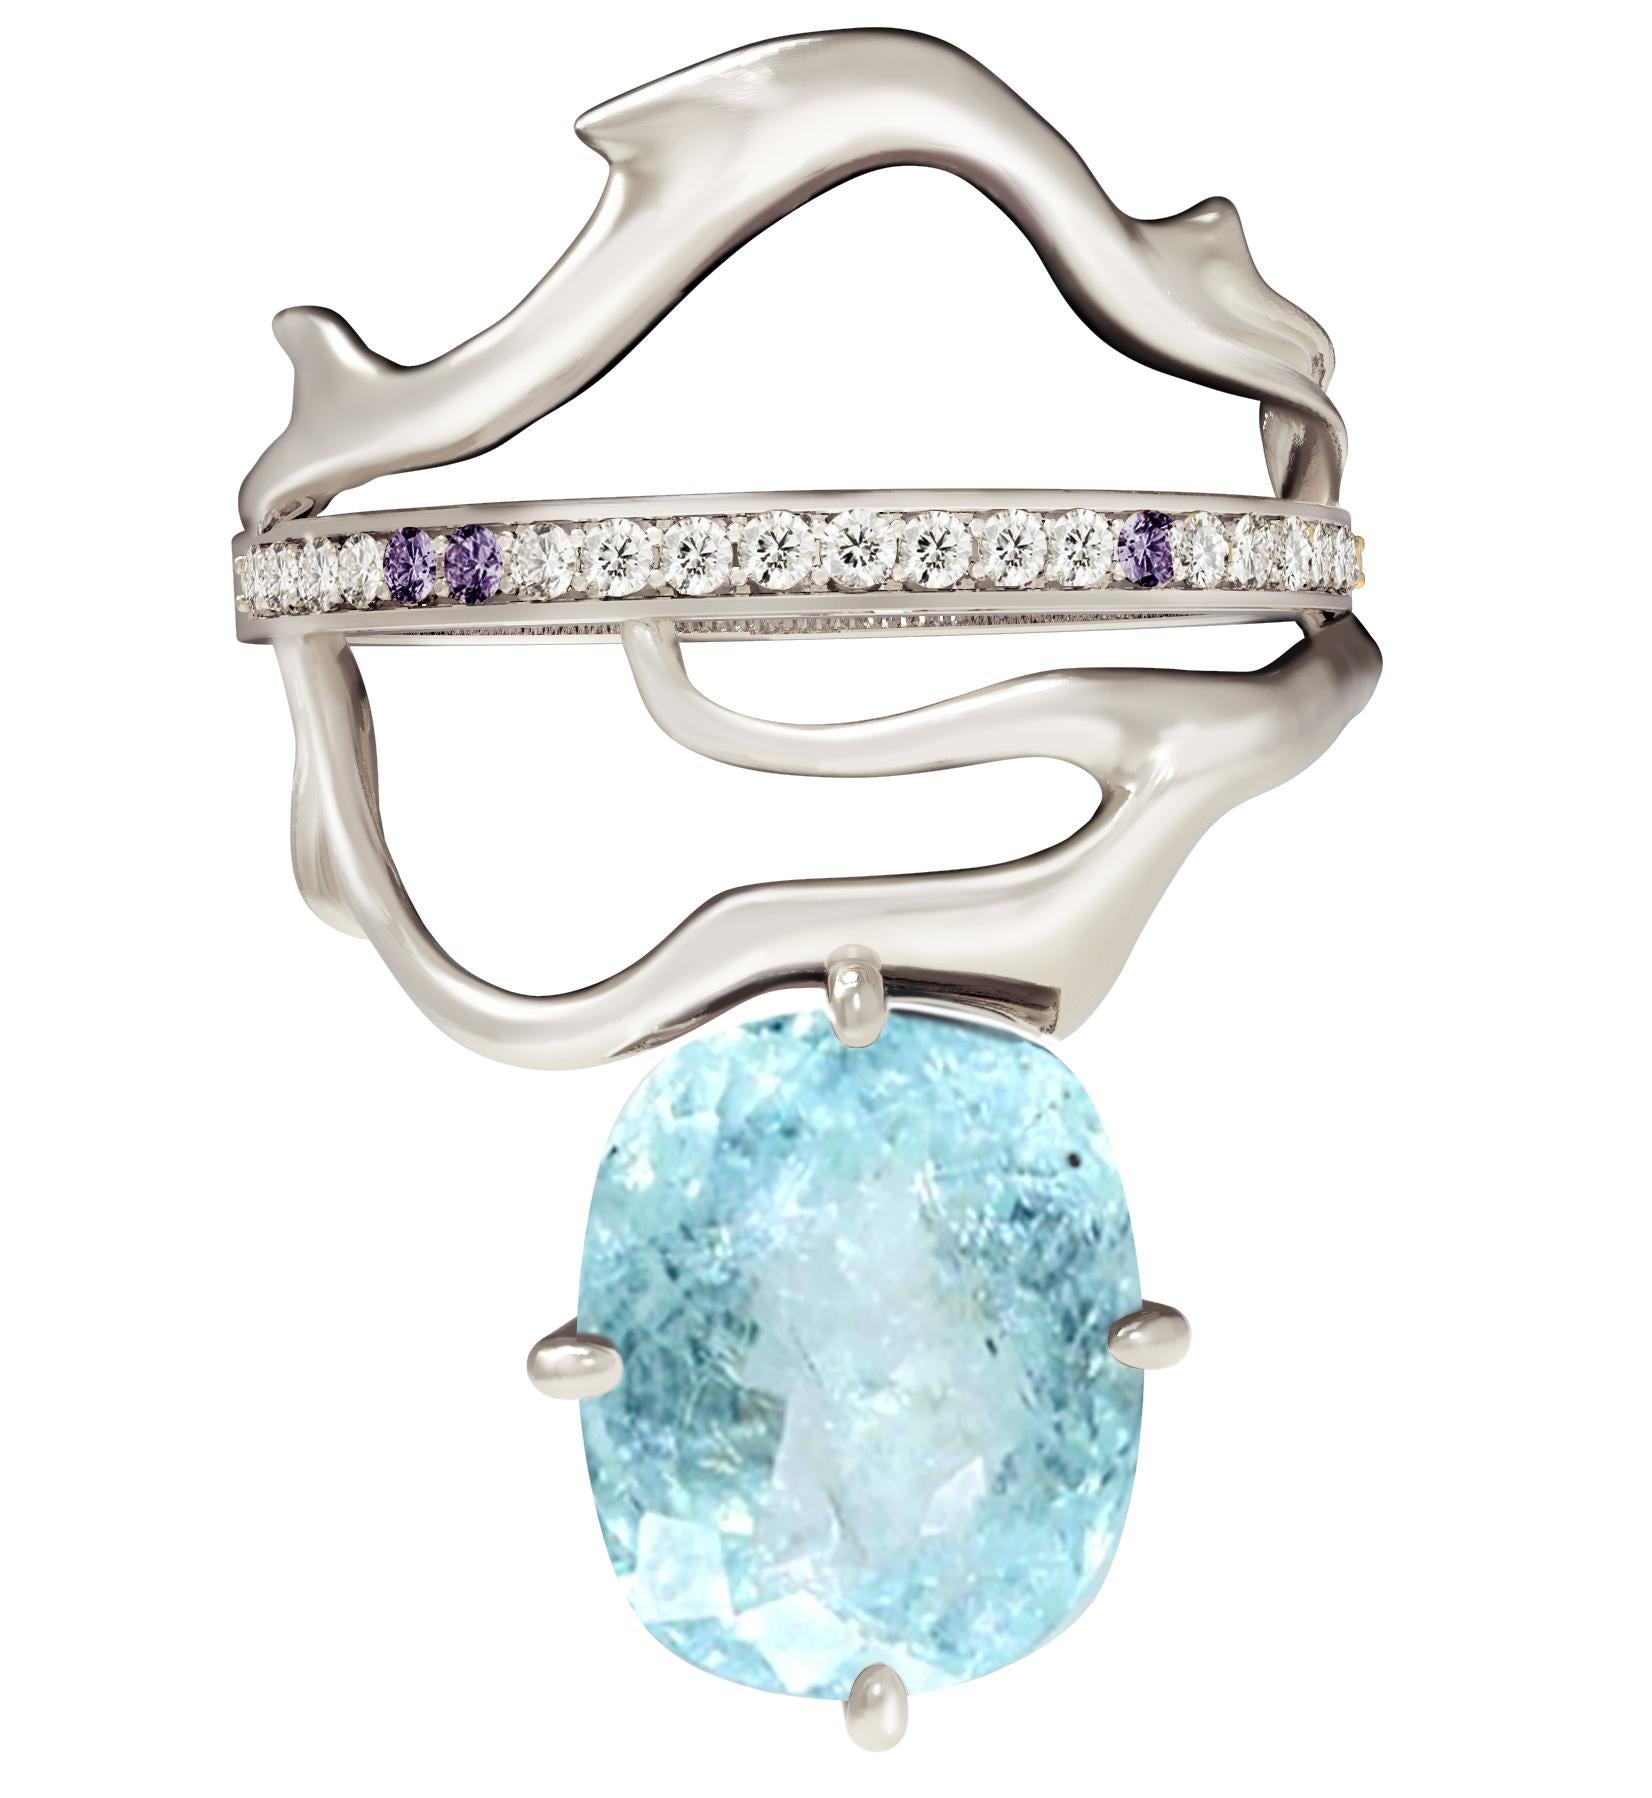 This Tibetan 18 karat white gold contemporary fashion ring is encrusted with diamonds, amethysts and oval cut paraiba tourmaline  (neon copper bearing, 2,4 carats, blue with inclusions). Size is custom made. It was inspired by Tibetan culture,